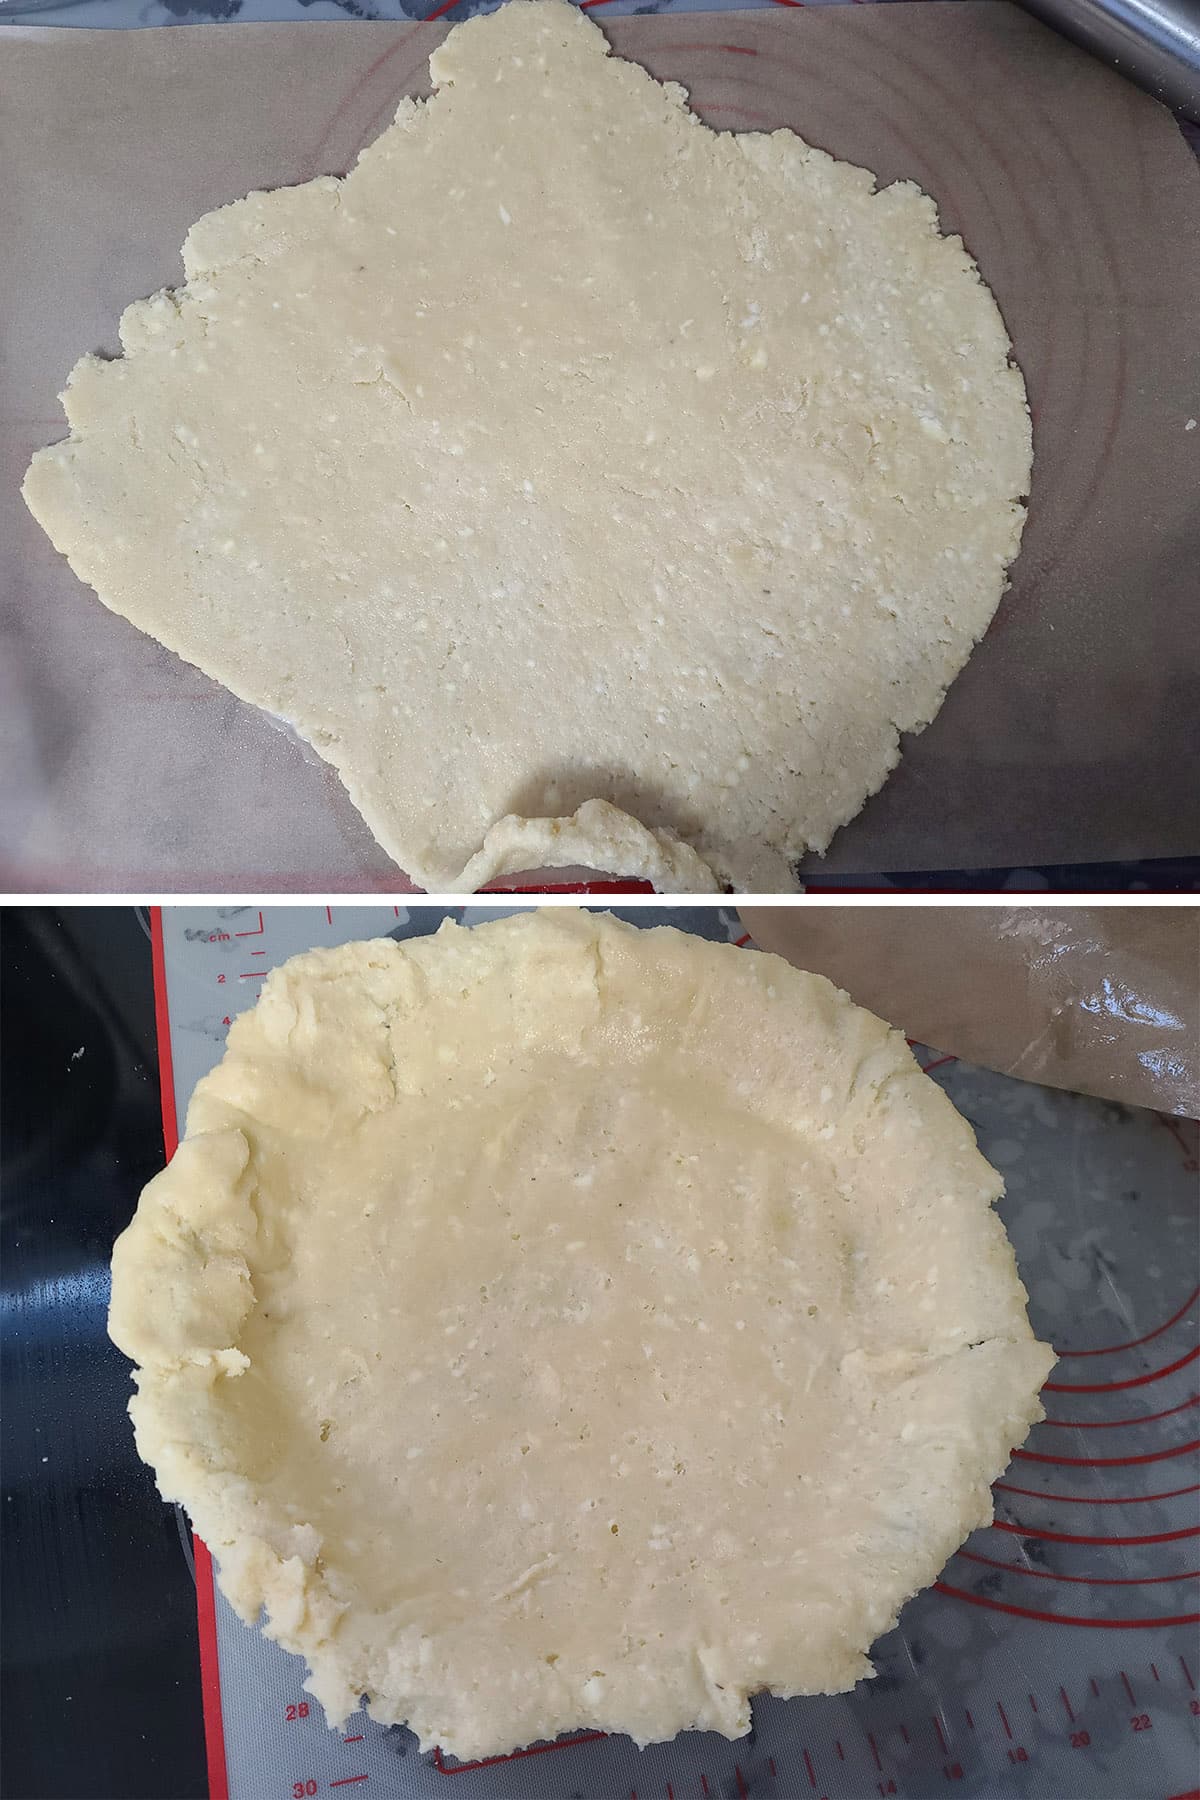 A 2 part image showing half the dough rolled out, then placed in a pie plate.